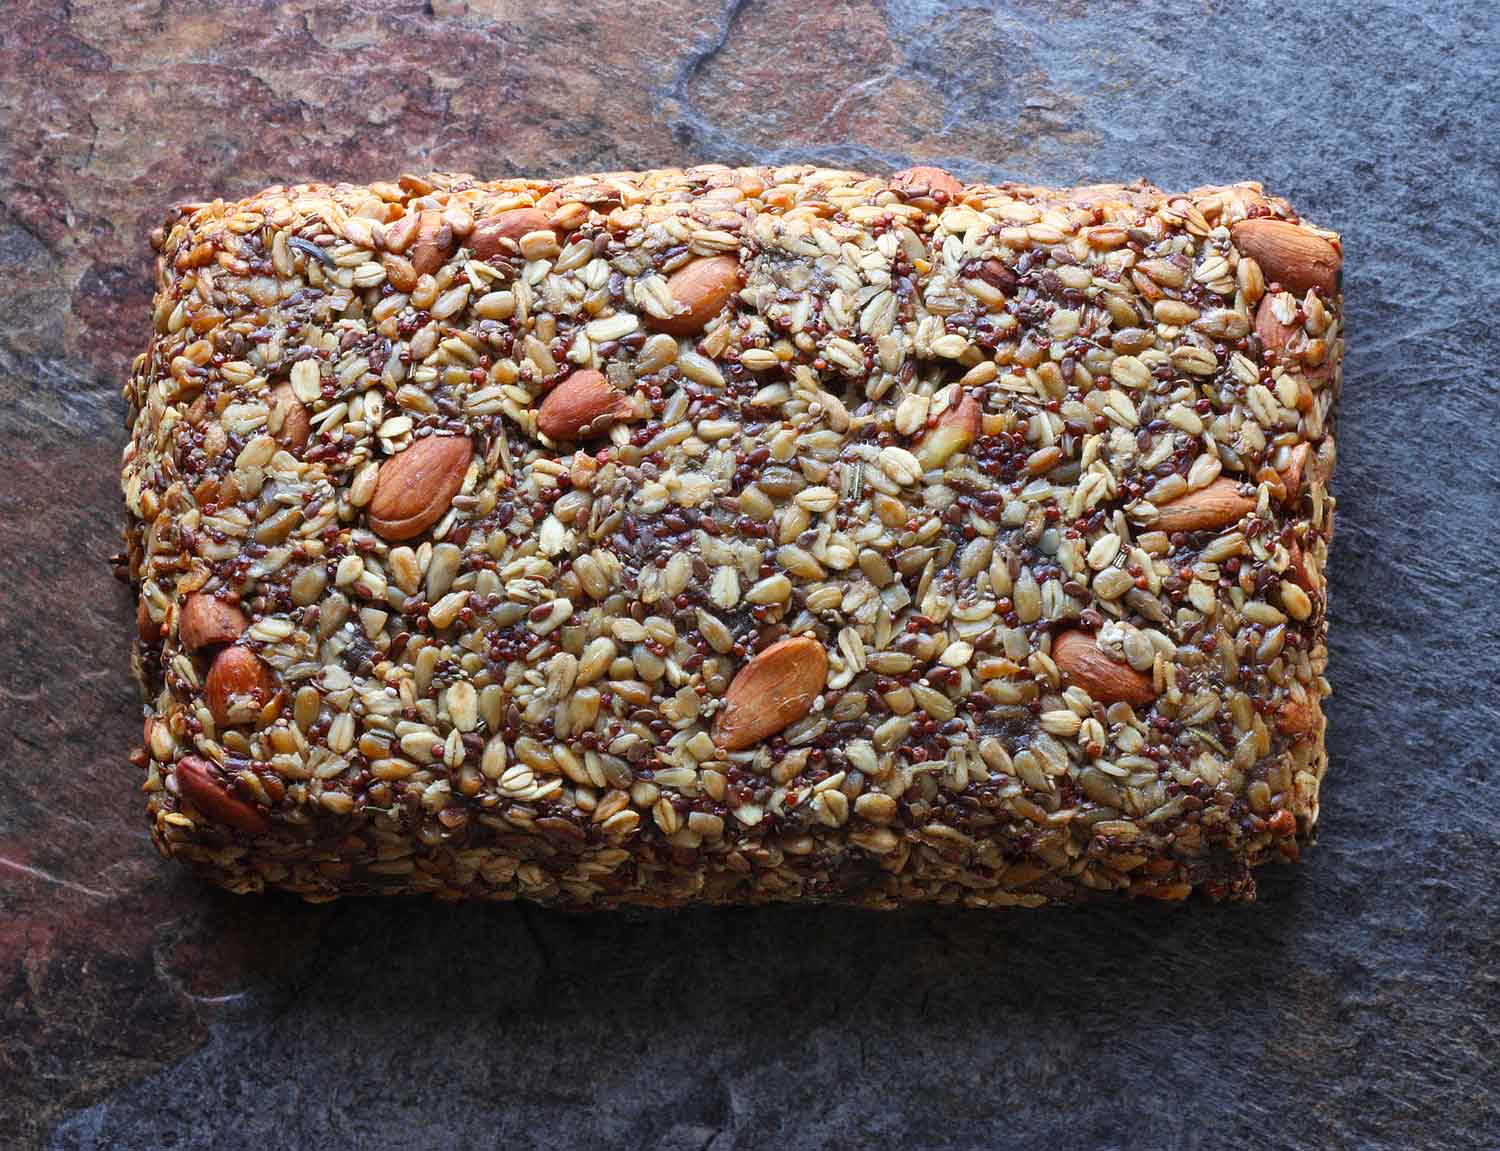 Top view of the Magic Seed and Nut Loaf.